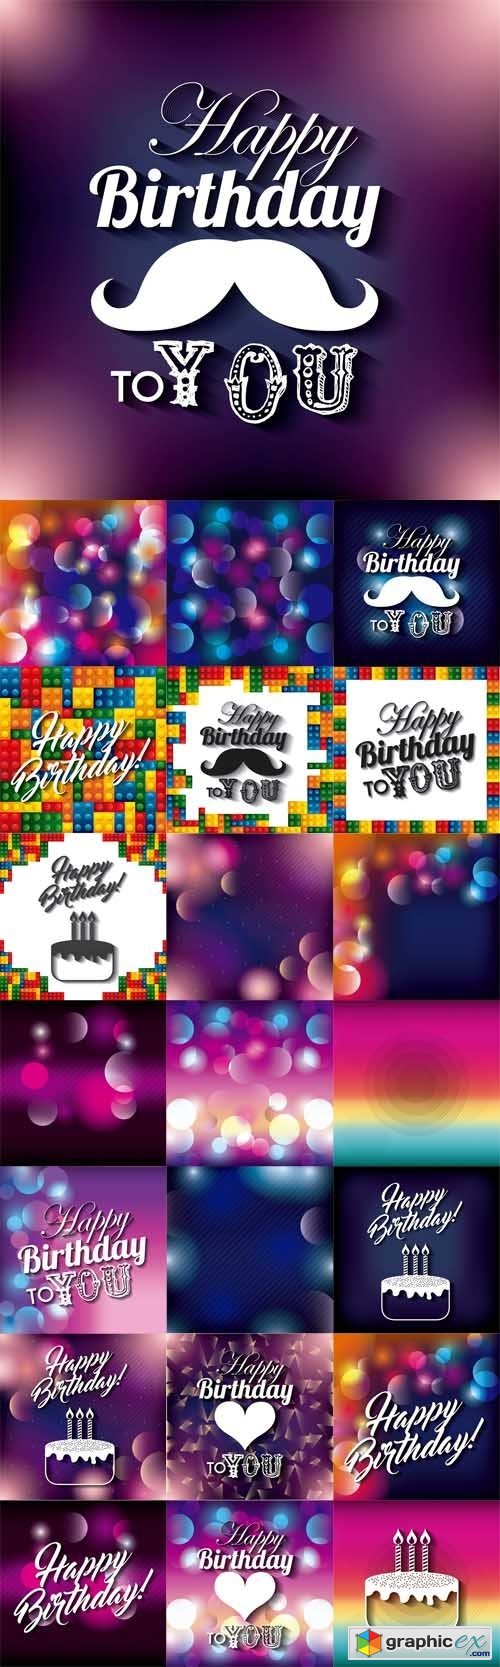 Blurred Backgrounds and Happy Birthday Design